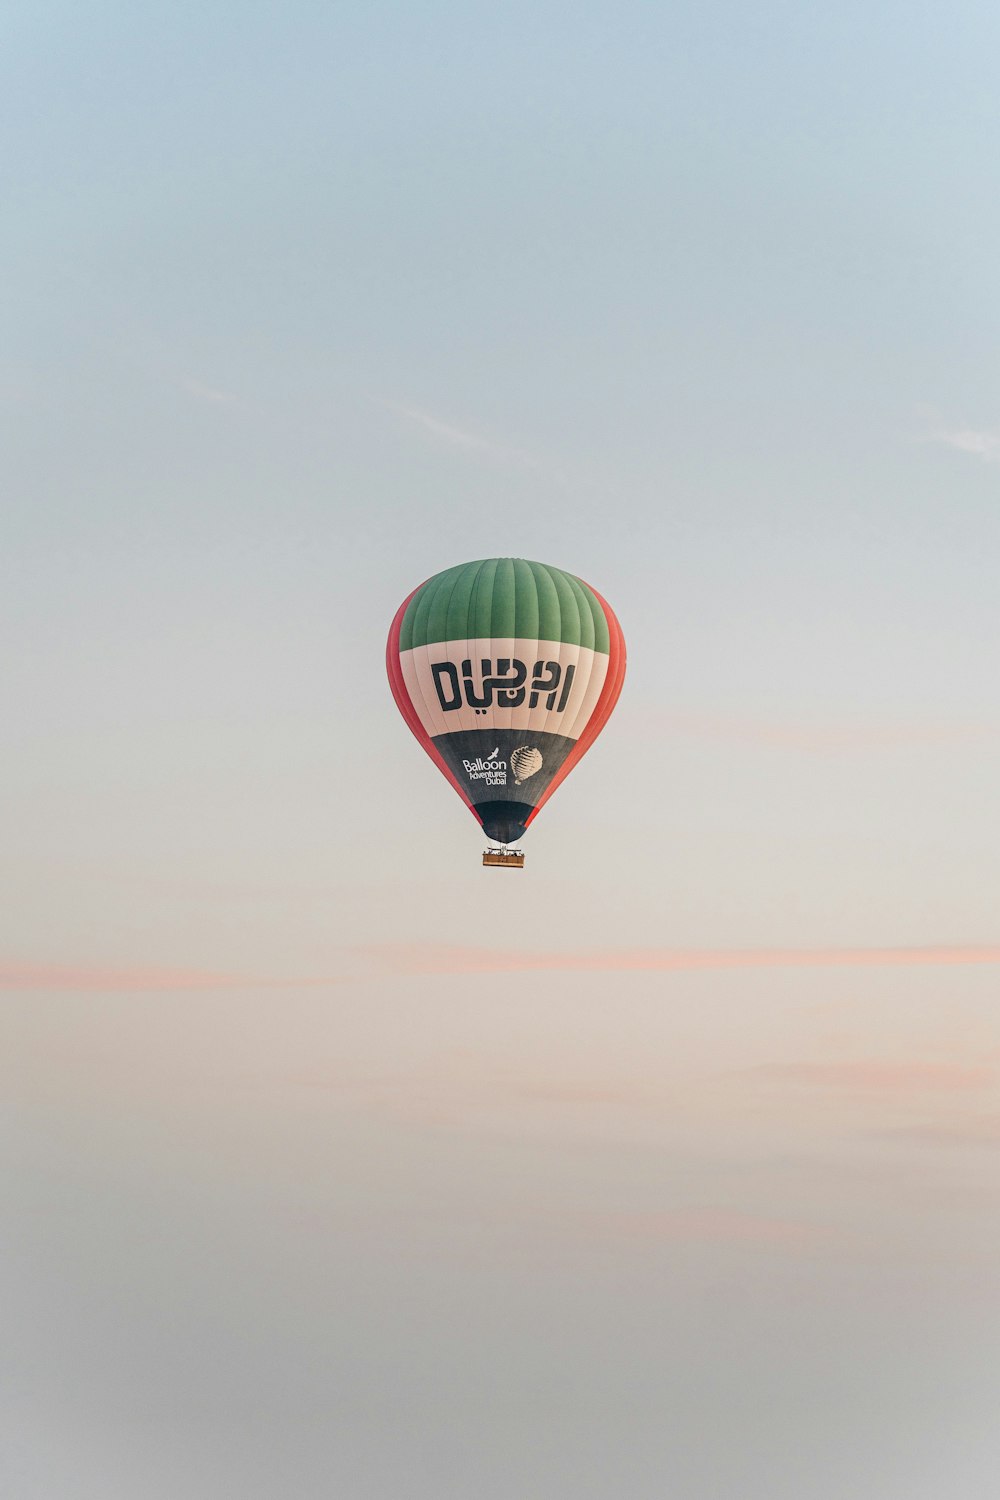 a hot air balloon flying in the sky